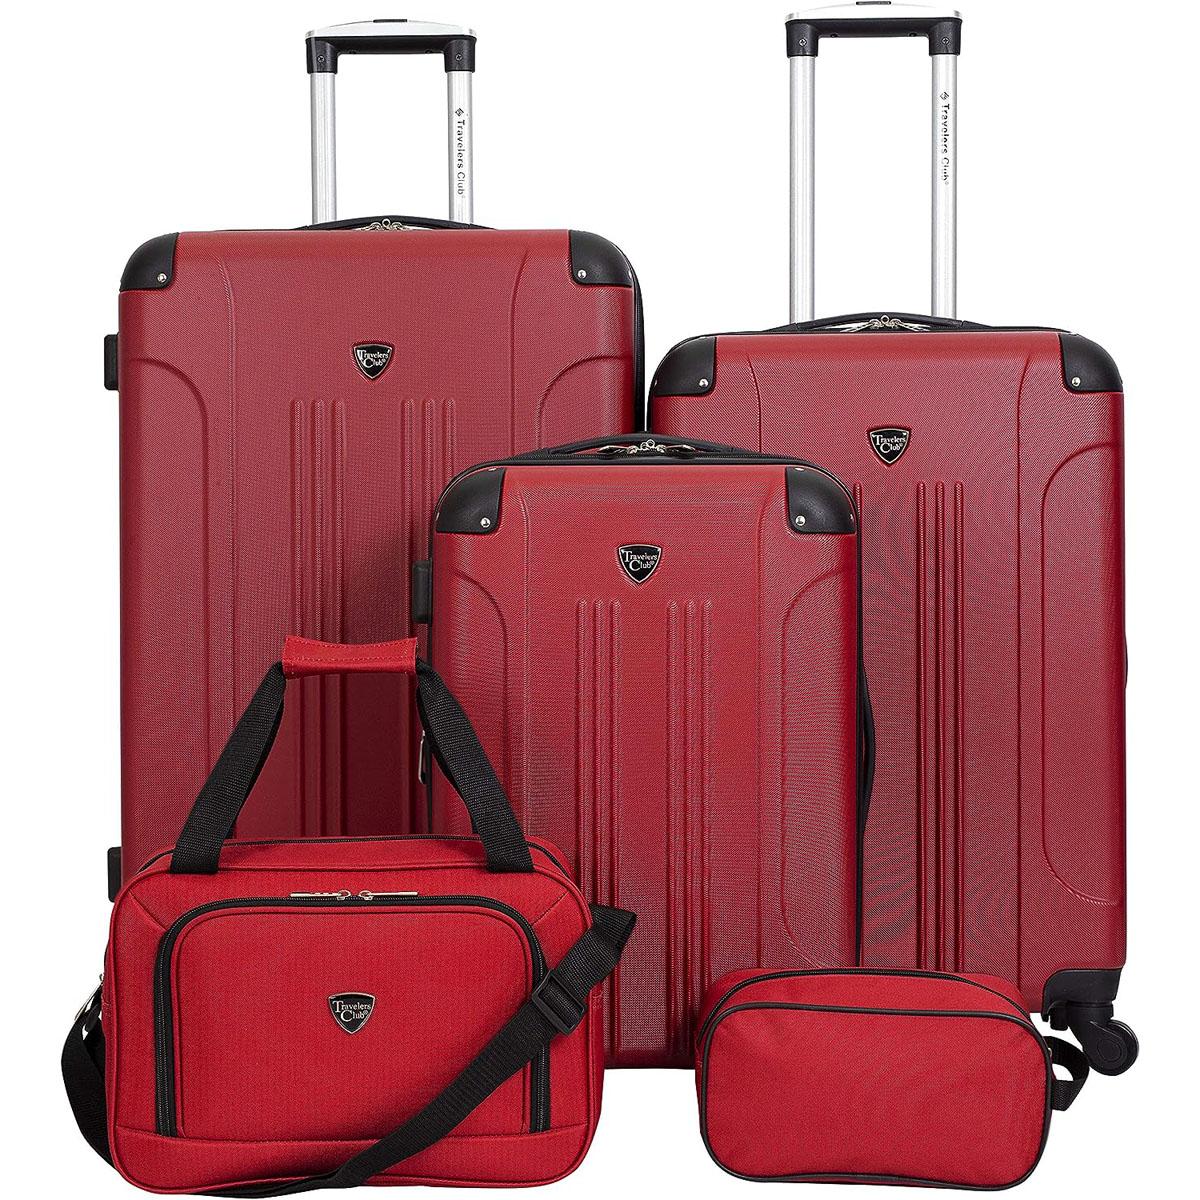 Travelers Club Chicago Hardside Expandable Spinner Luggages for $110.58 Shipped